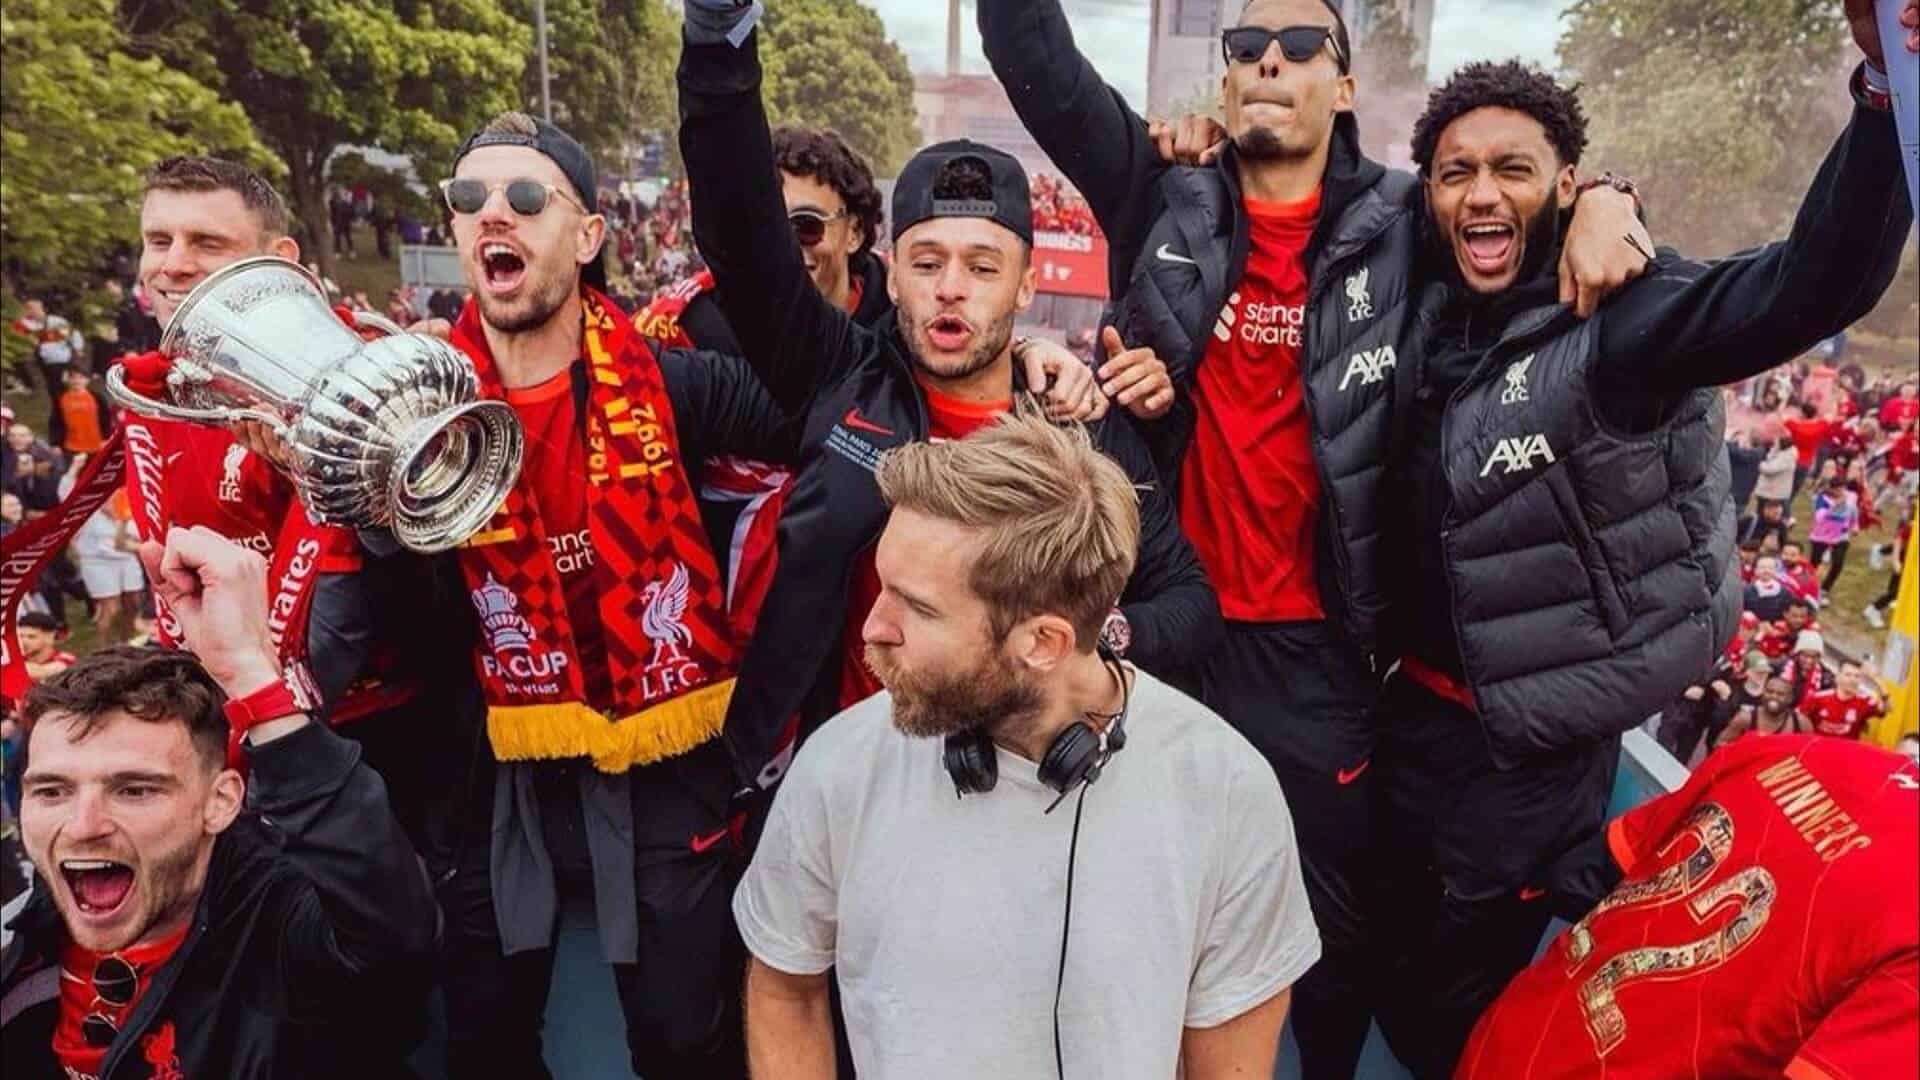 Calvin Harris on his Liverpool FC bus set: “It was the biggest gig of my life”